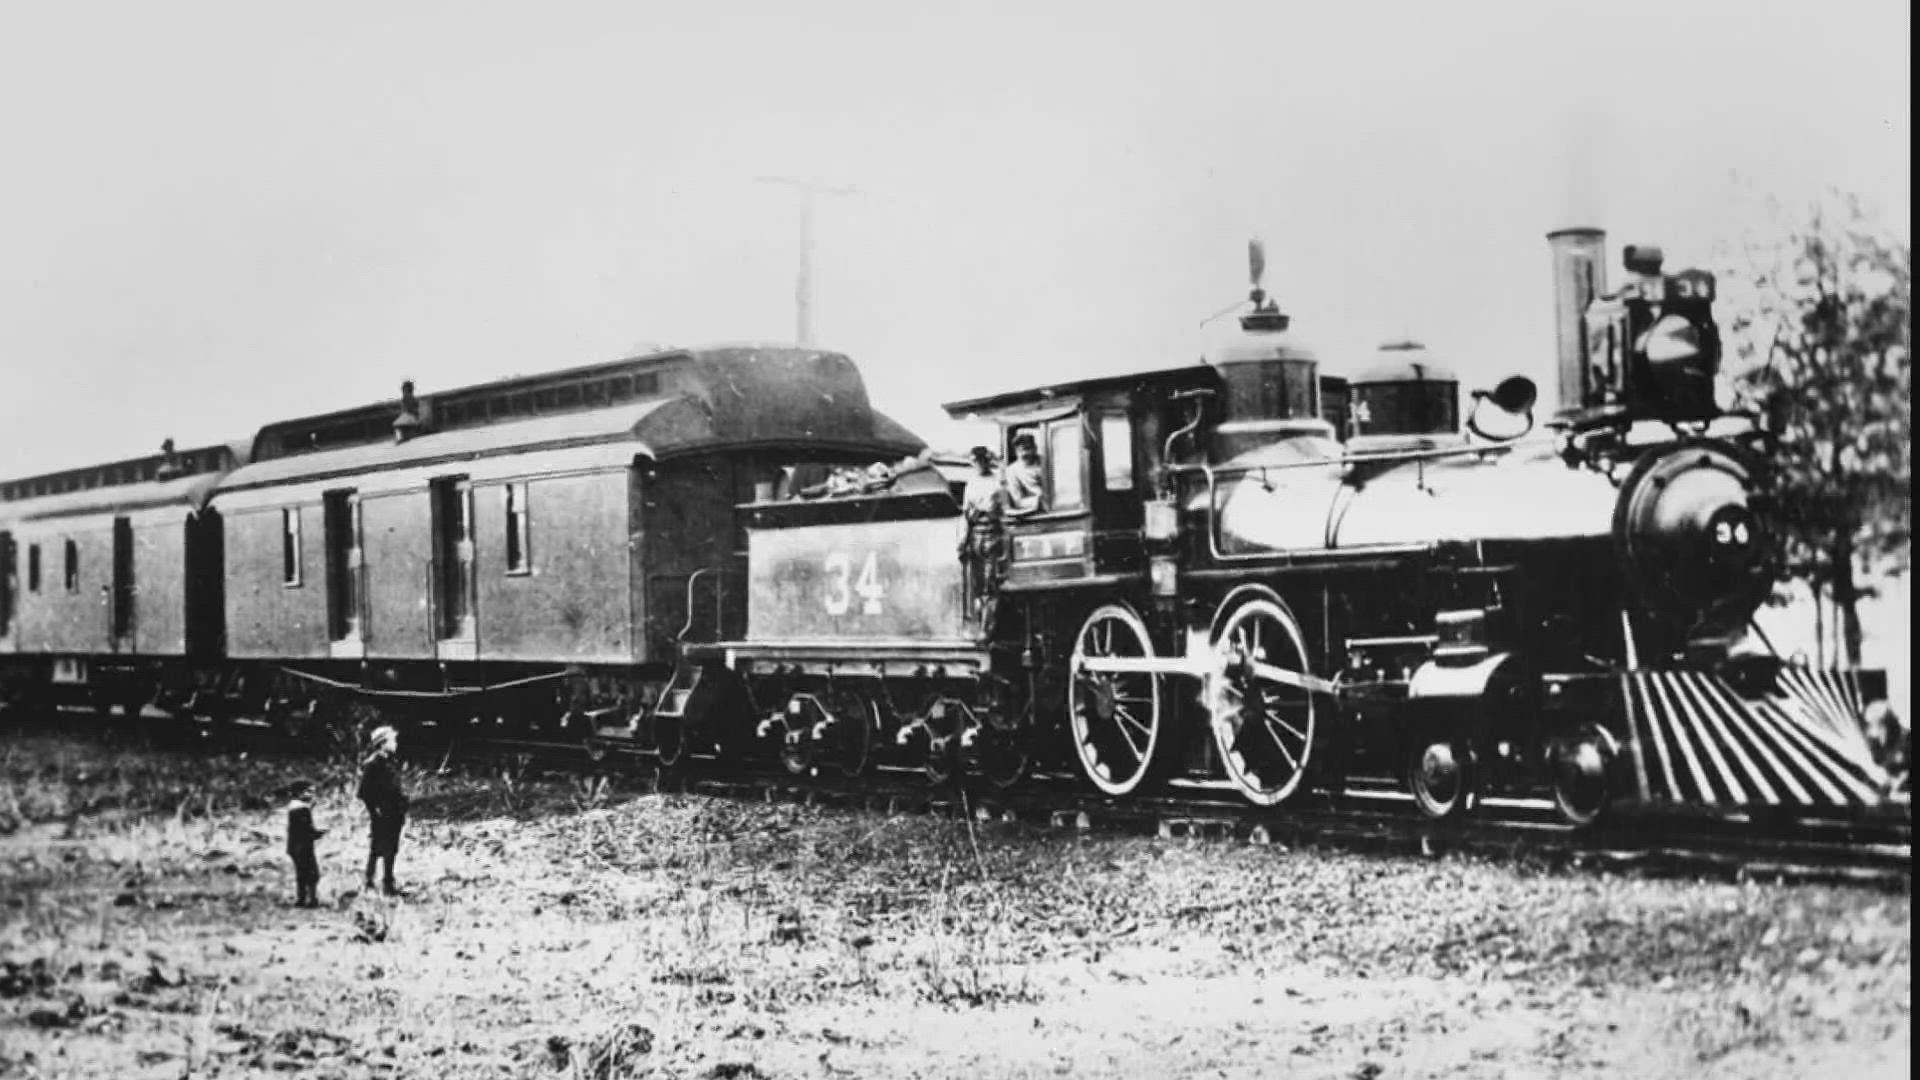 The locomotive chugged along the freshly-built tracks of the Houston and Texas Central Railway, which cut through what is now downtown Dallas.